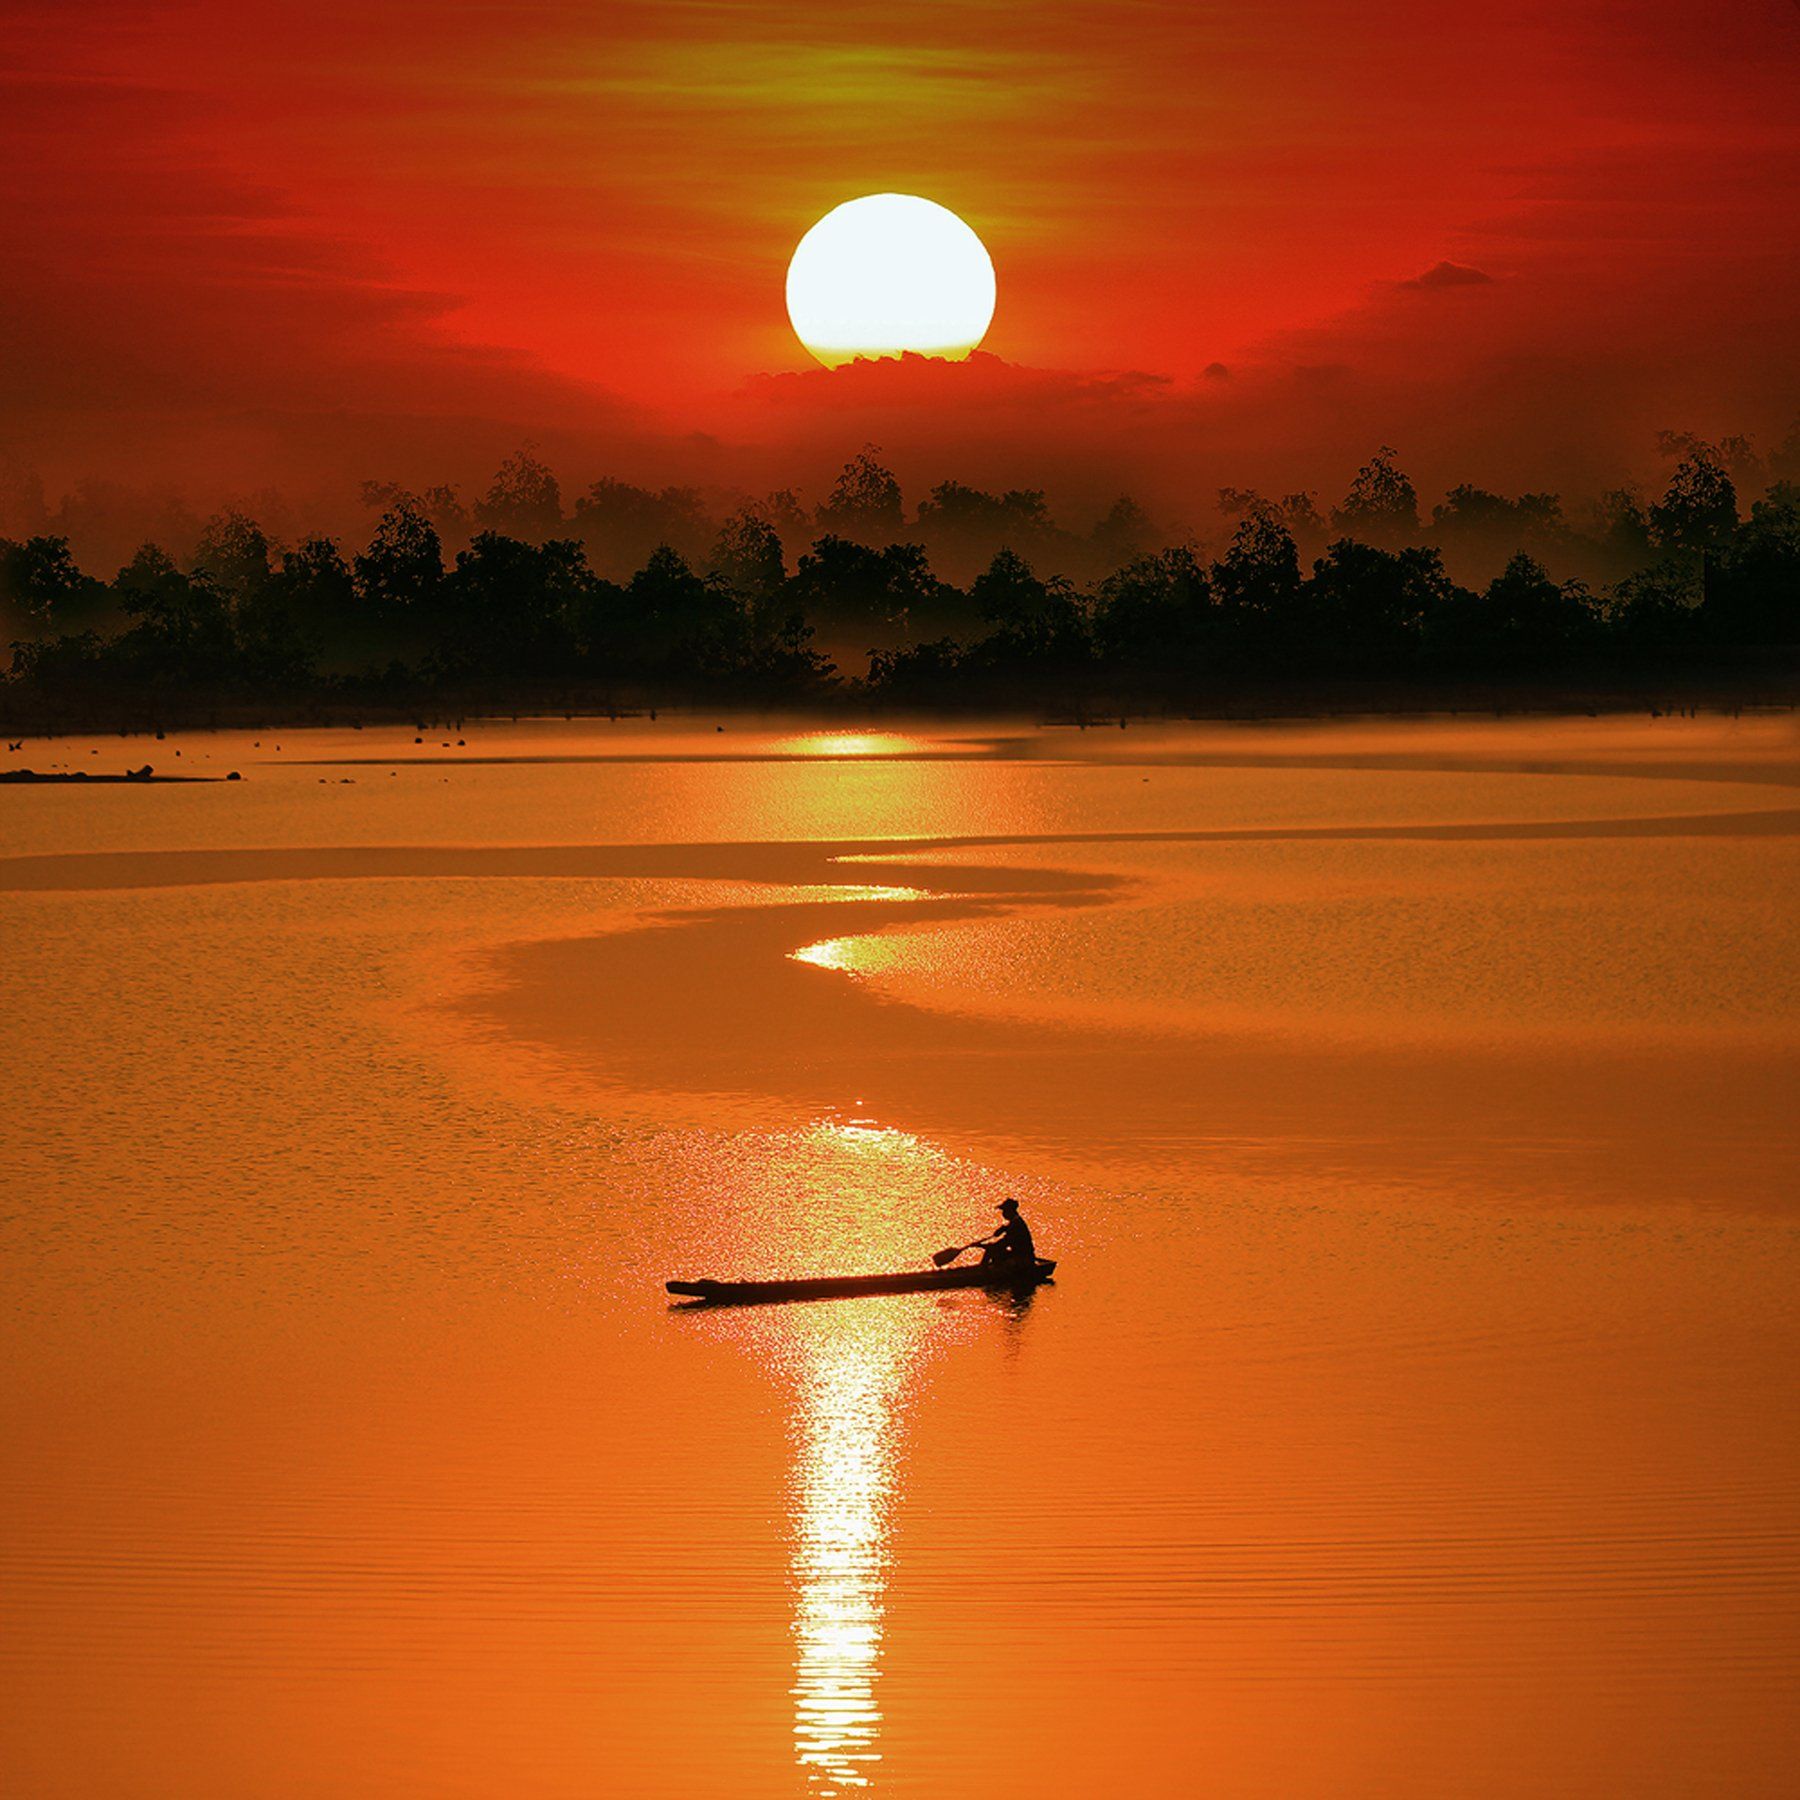 Red, Sunset, Thailand, Scenics, Sea, Silhouette, Color Image, Sun, Cloud - Sky, Fisherman, Fishing, Orange Color, One Person, Fishing Boat, On The Move, Reflection, Adult, Adults Only, Beauty In Nature, Distant, Nature, One Man Only, Outdoors, People, Pho, sarawut intarob